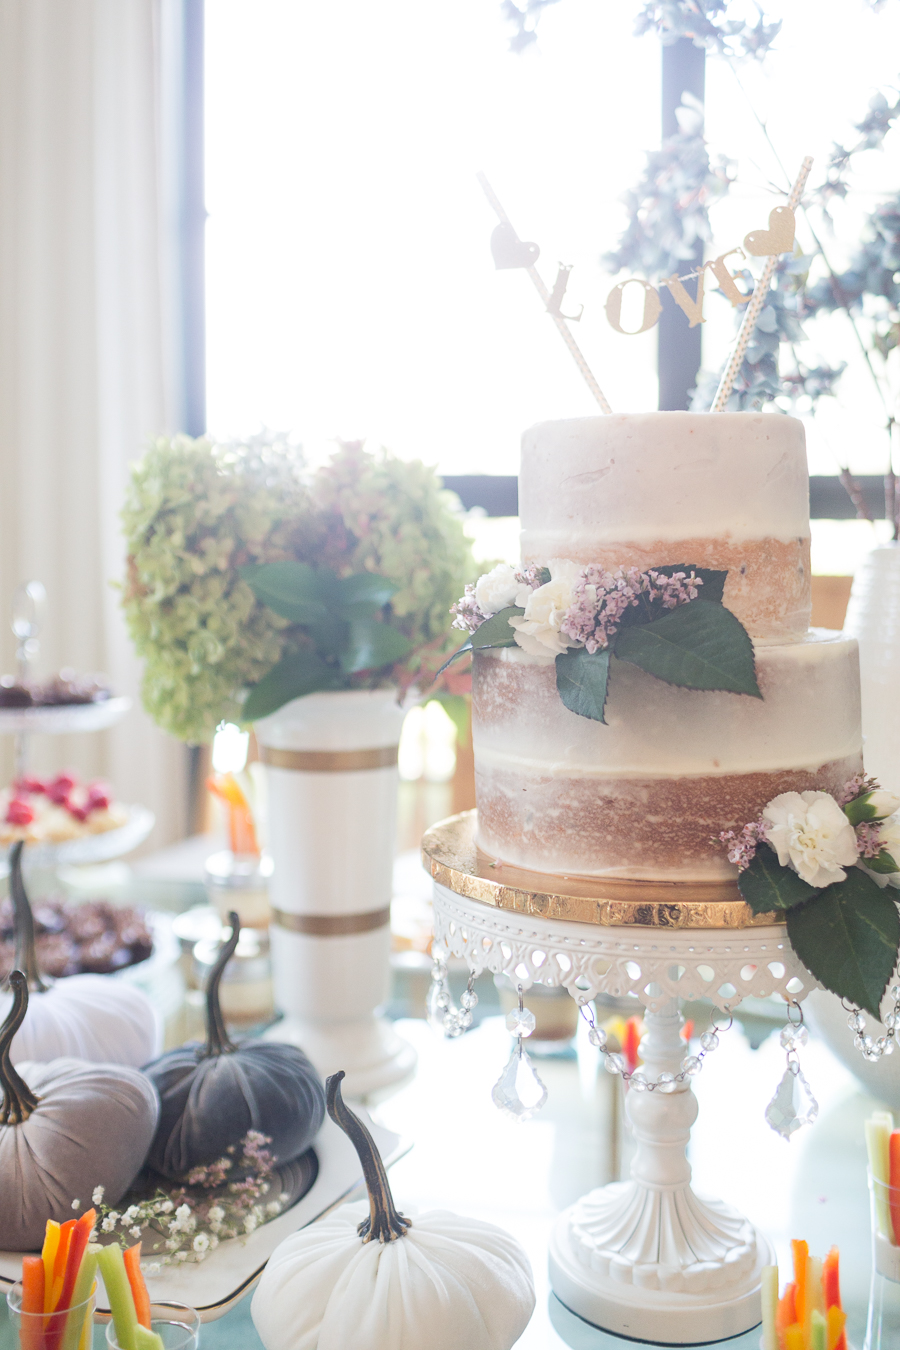 Beautiful Fall Bridal Shower Ideas fall bridal shower cake on a white cake stand surrounded by velvet pumpkins and hydrangeas